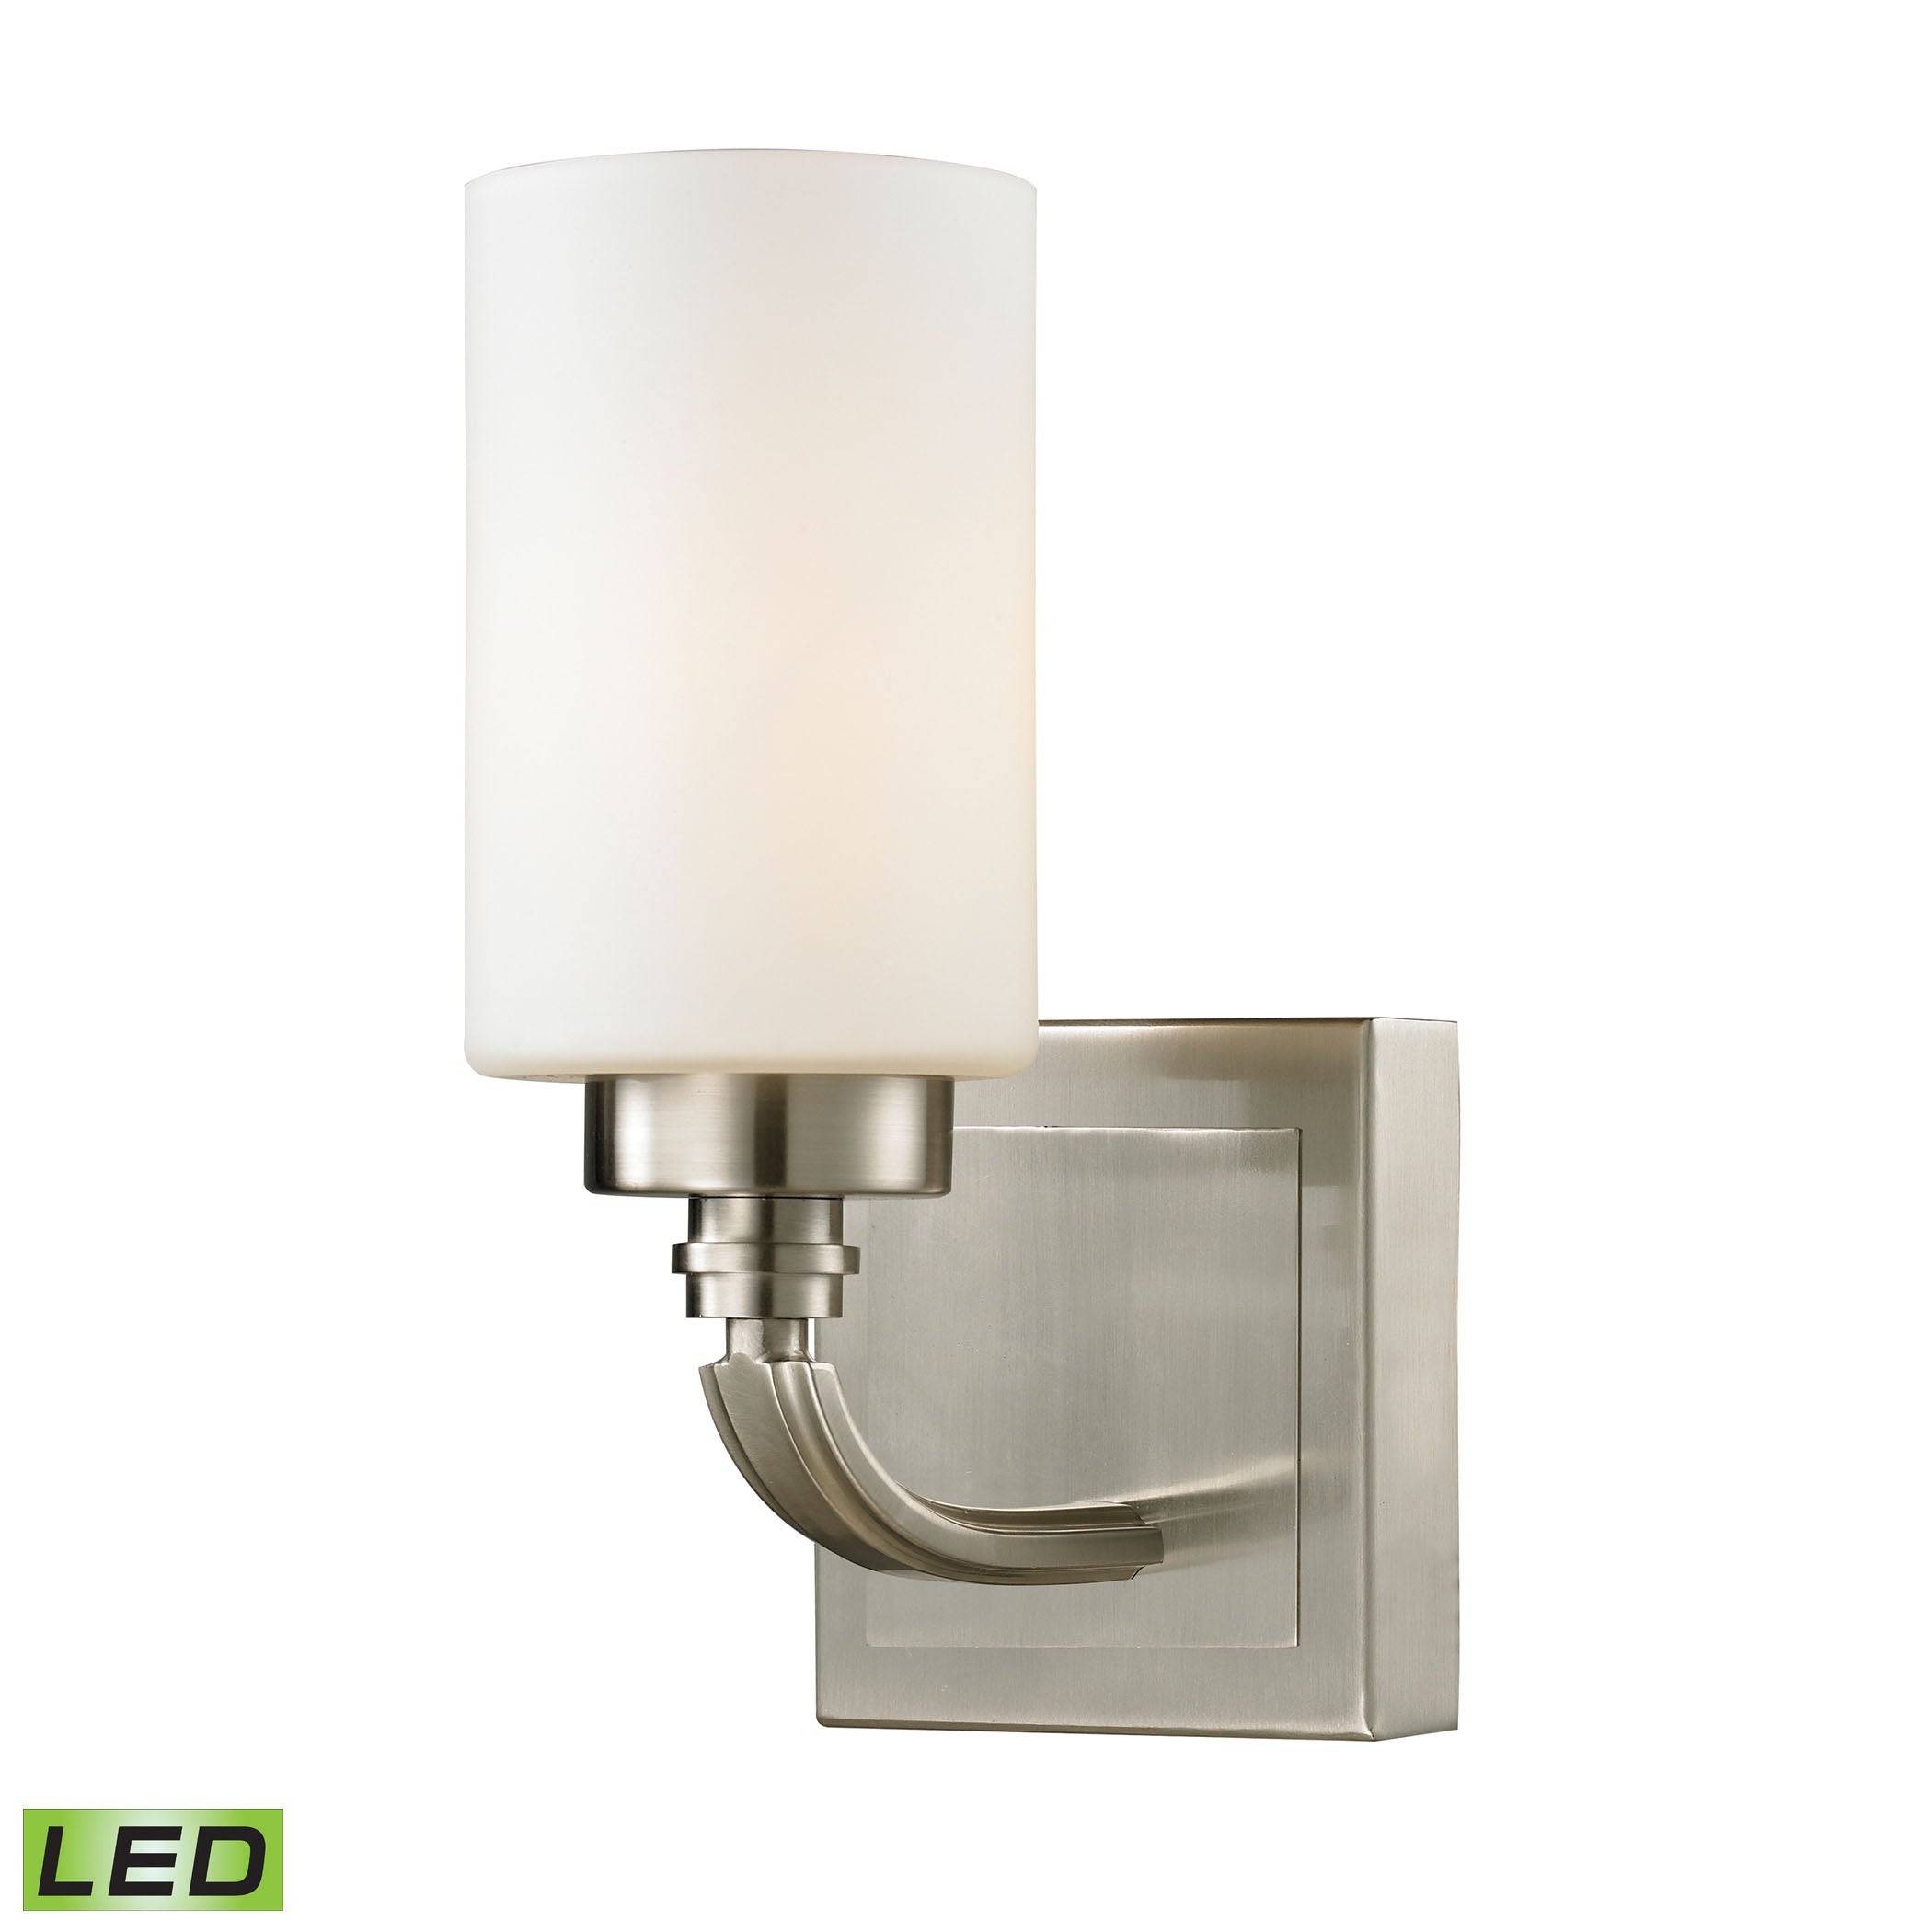 ELK Lighting 11660/1-LED Dawson 1-Light Vanity Lamp in Brushed Nickel with White Glass - Includes LED Bulb